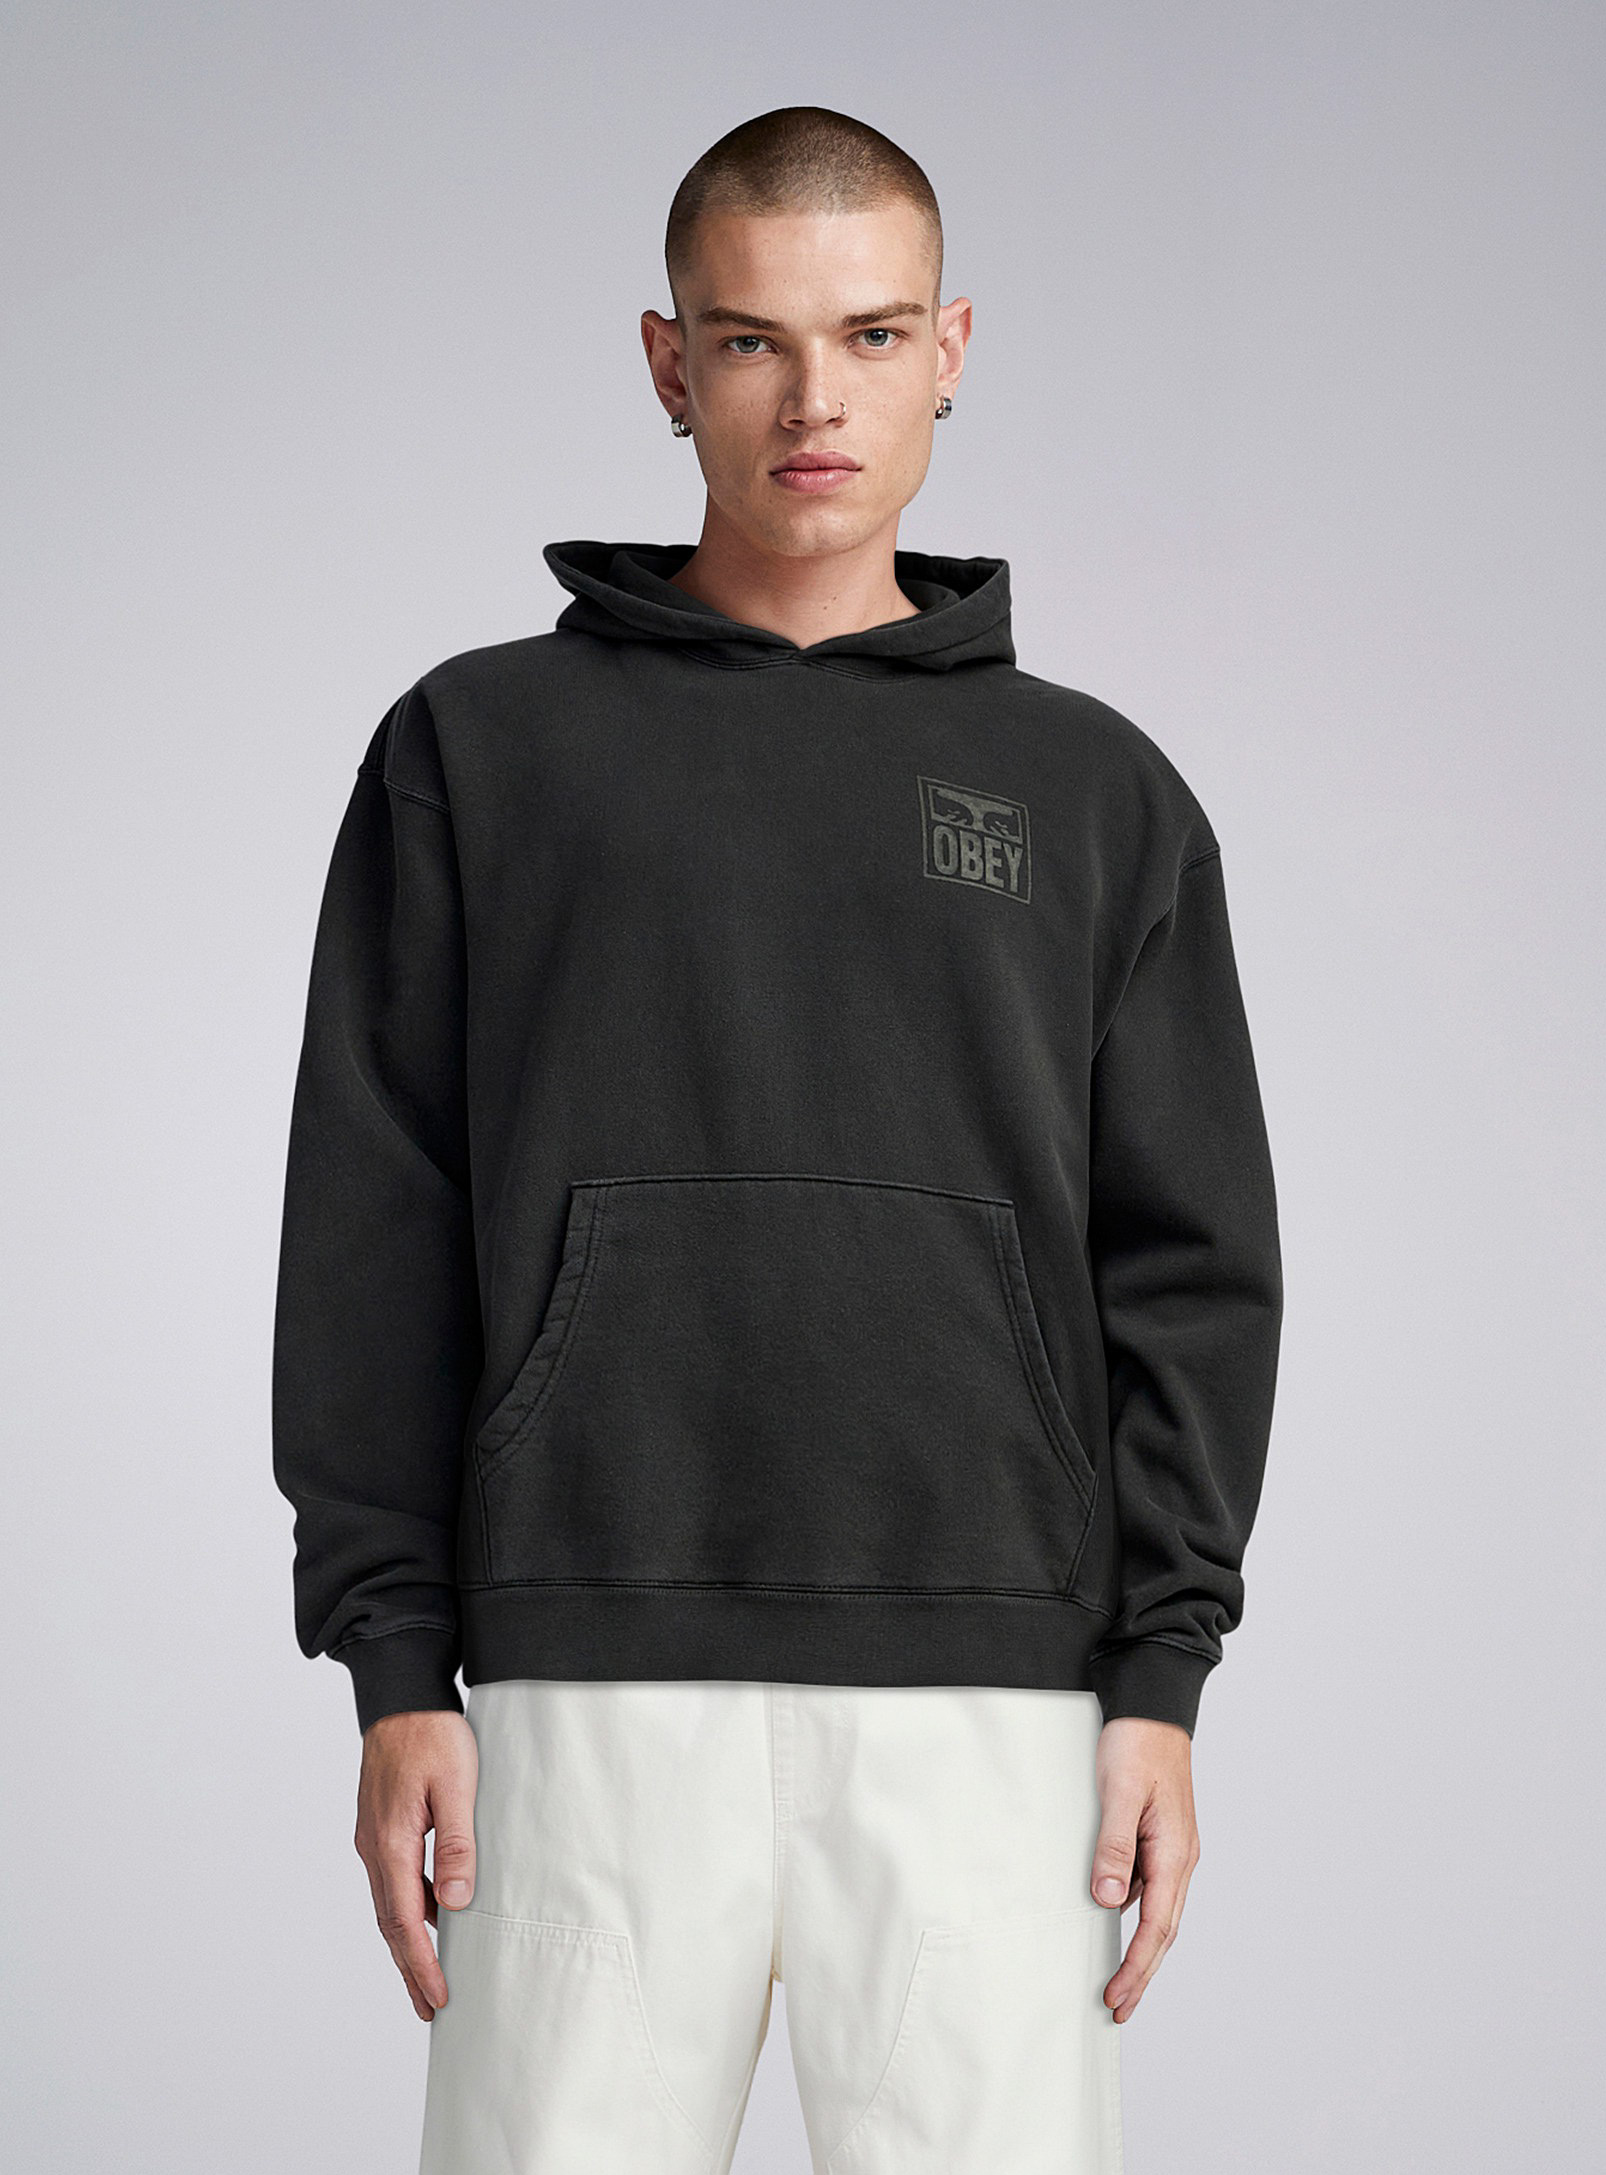 Obey - Men's Eyes Icon faded hoodie